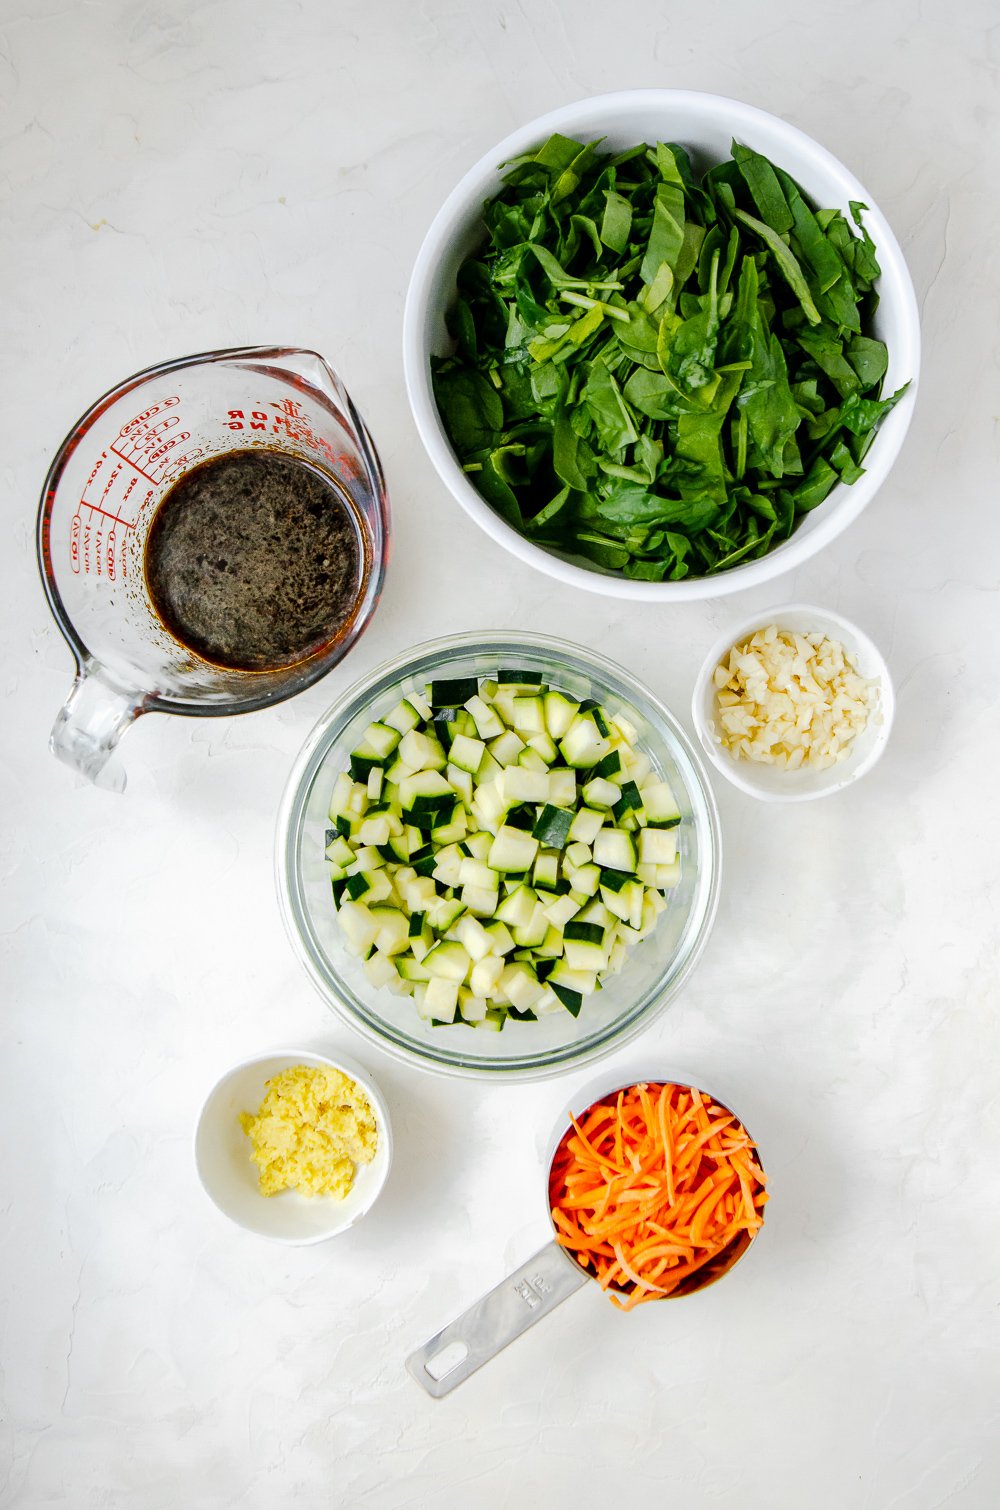 Ingredients for chicken larb bowl including baby spinach, coconut aminos, zucchini, garlic, ginger and carrot